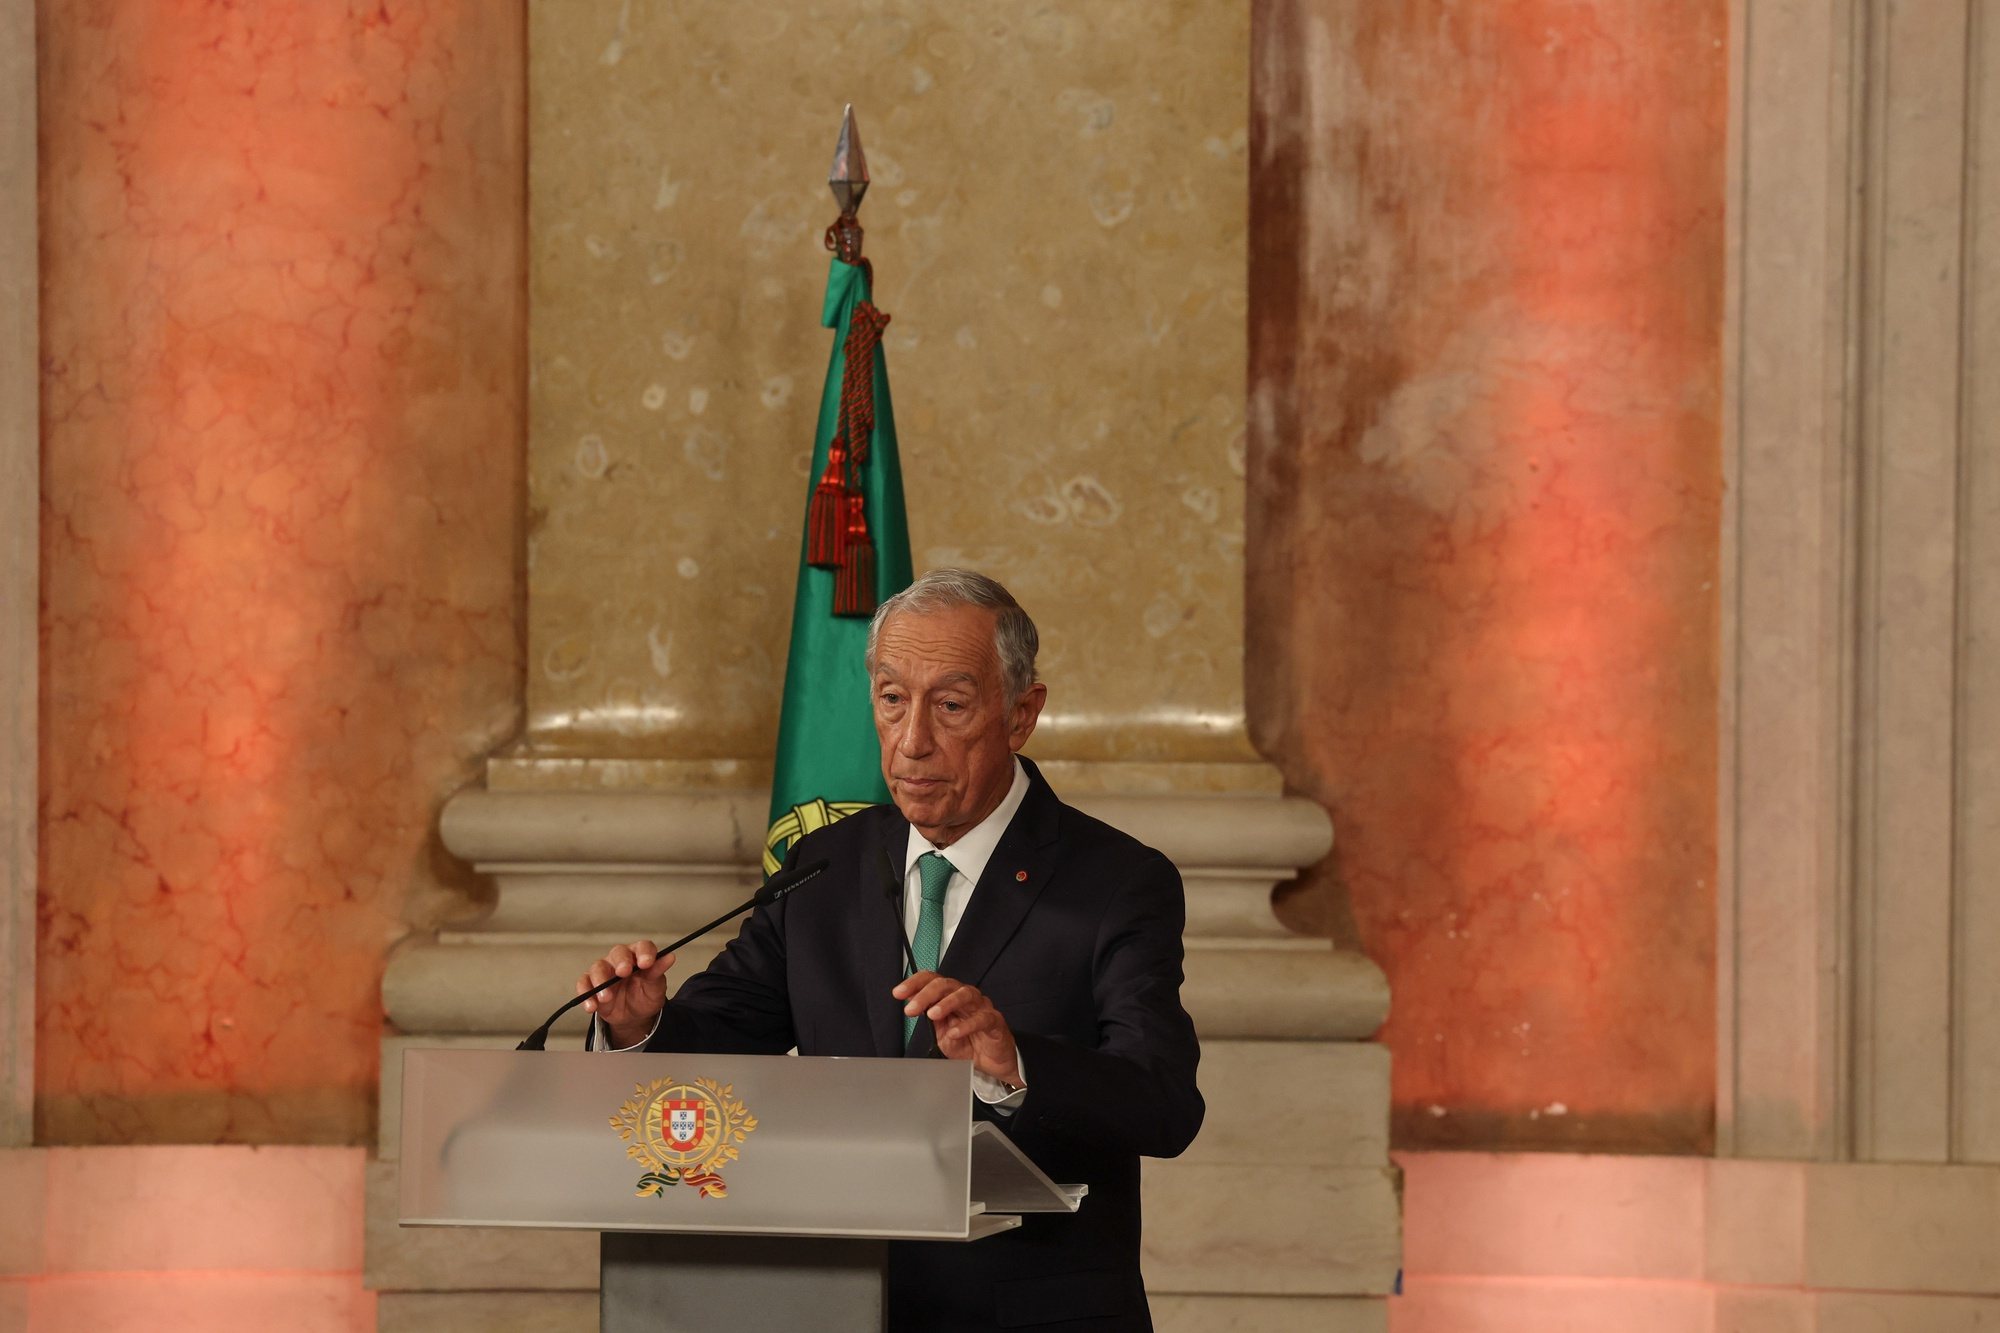 Portuguese President Marcelo Rebelo de Sousa, speak during the swearing in cerimony of the XXIV Constitutional Government held at Ajuda Palace, in Lisbon, Portugal, 02 April March 2024. These legislative elections resulted in the victory of AD - a pre-election coalition formed by PSD, CDS-PP and People&#039;s Monarchist Party (PPM) - by around 54,000 votes (0.85%) more than the PS, the narrowest margin in the history of Portuguese democracy. The two coalitions led by the PSD (the AD on the mainland and in the Azores, and Madeira Primeiro with the PSD and CDS-PP in Madeira) - won 28.83% of the votes and 80 members of parliament (78 for the PSD and two from the CDS-PP), according to the official results. The PS was the second-most-voted party with 27.98% and 78 MPs. JOAO RELVAS/LUSA